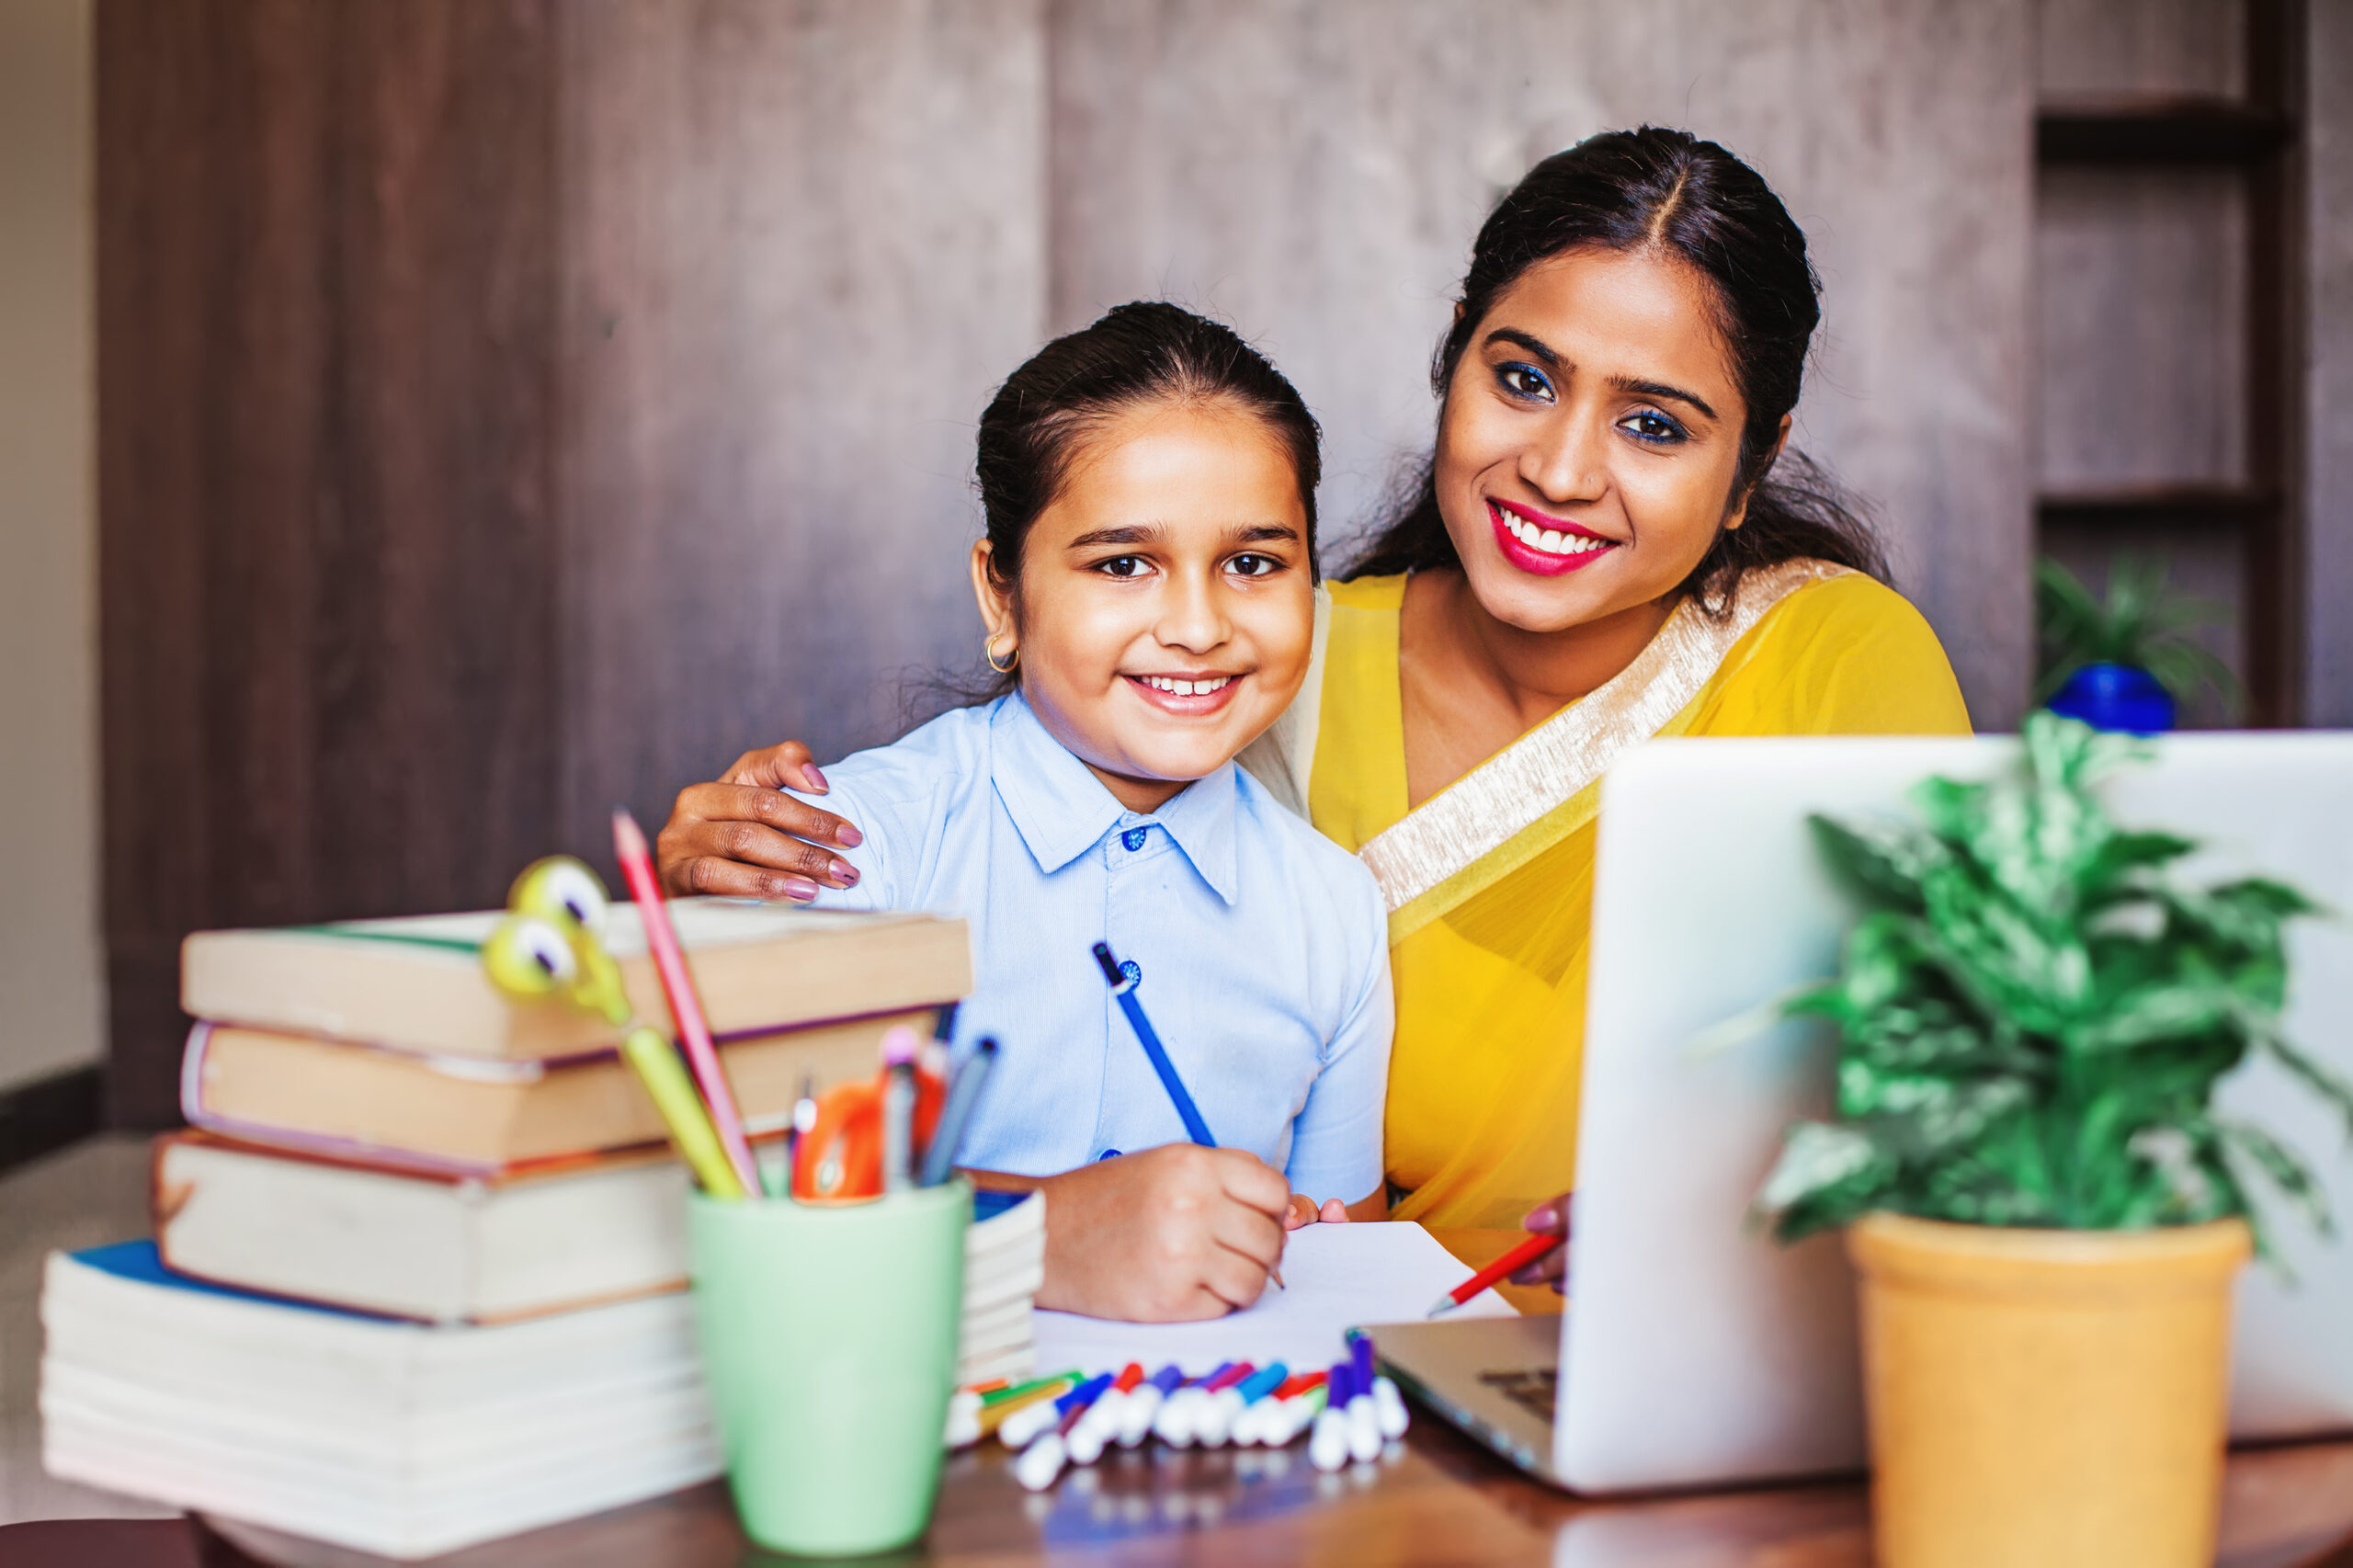 Indian mother and her daughter posing while doing homework with the help of laptop